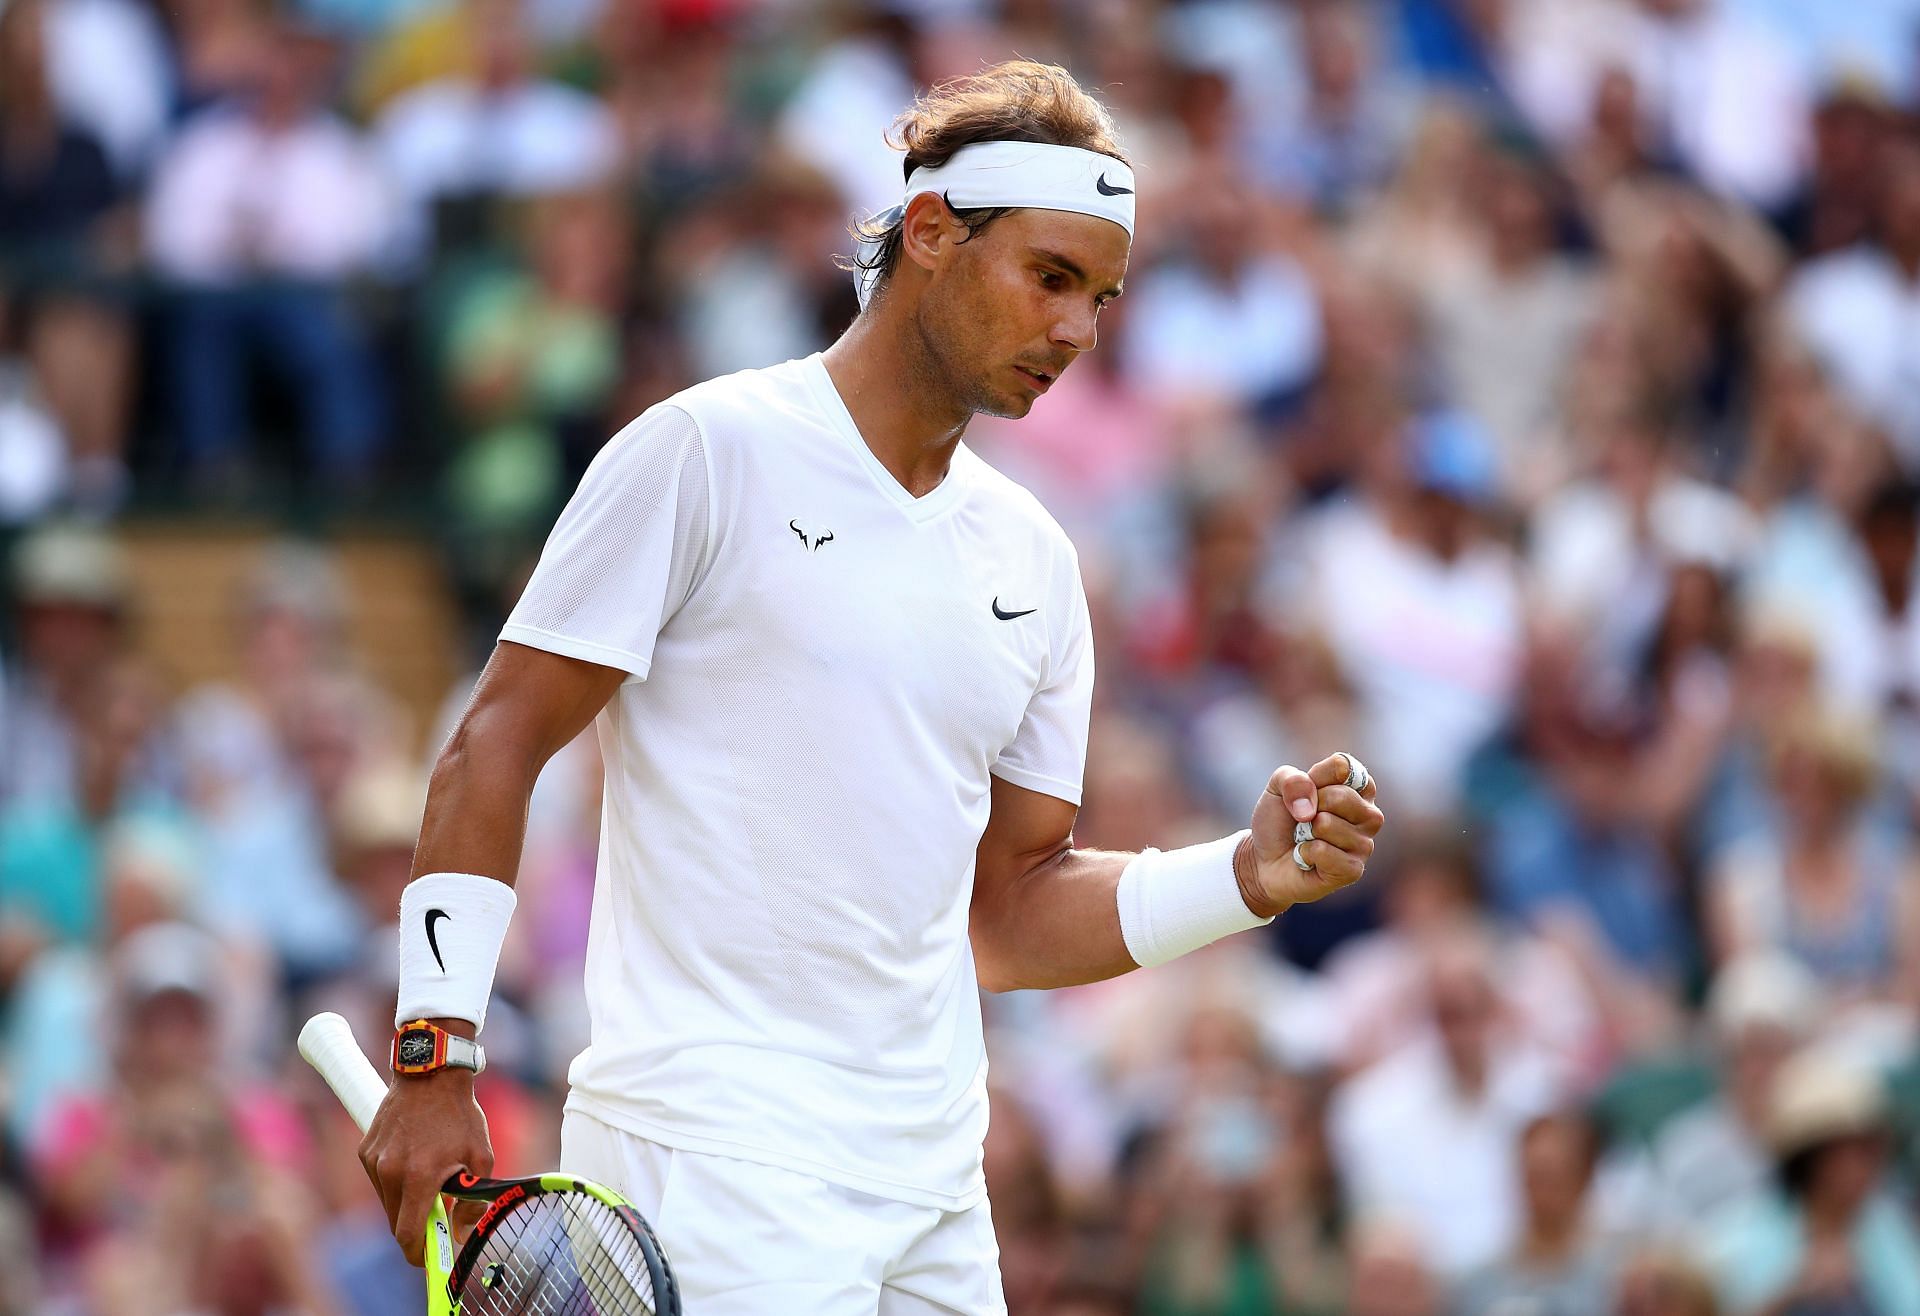 Rafael Nadal has won the Wimbledon Championships in 2008 and 2010